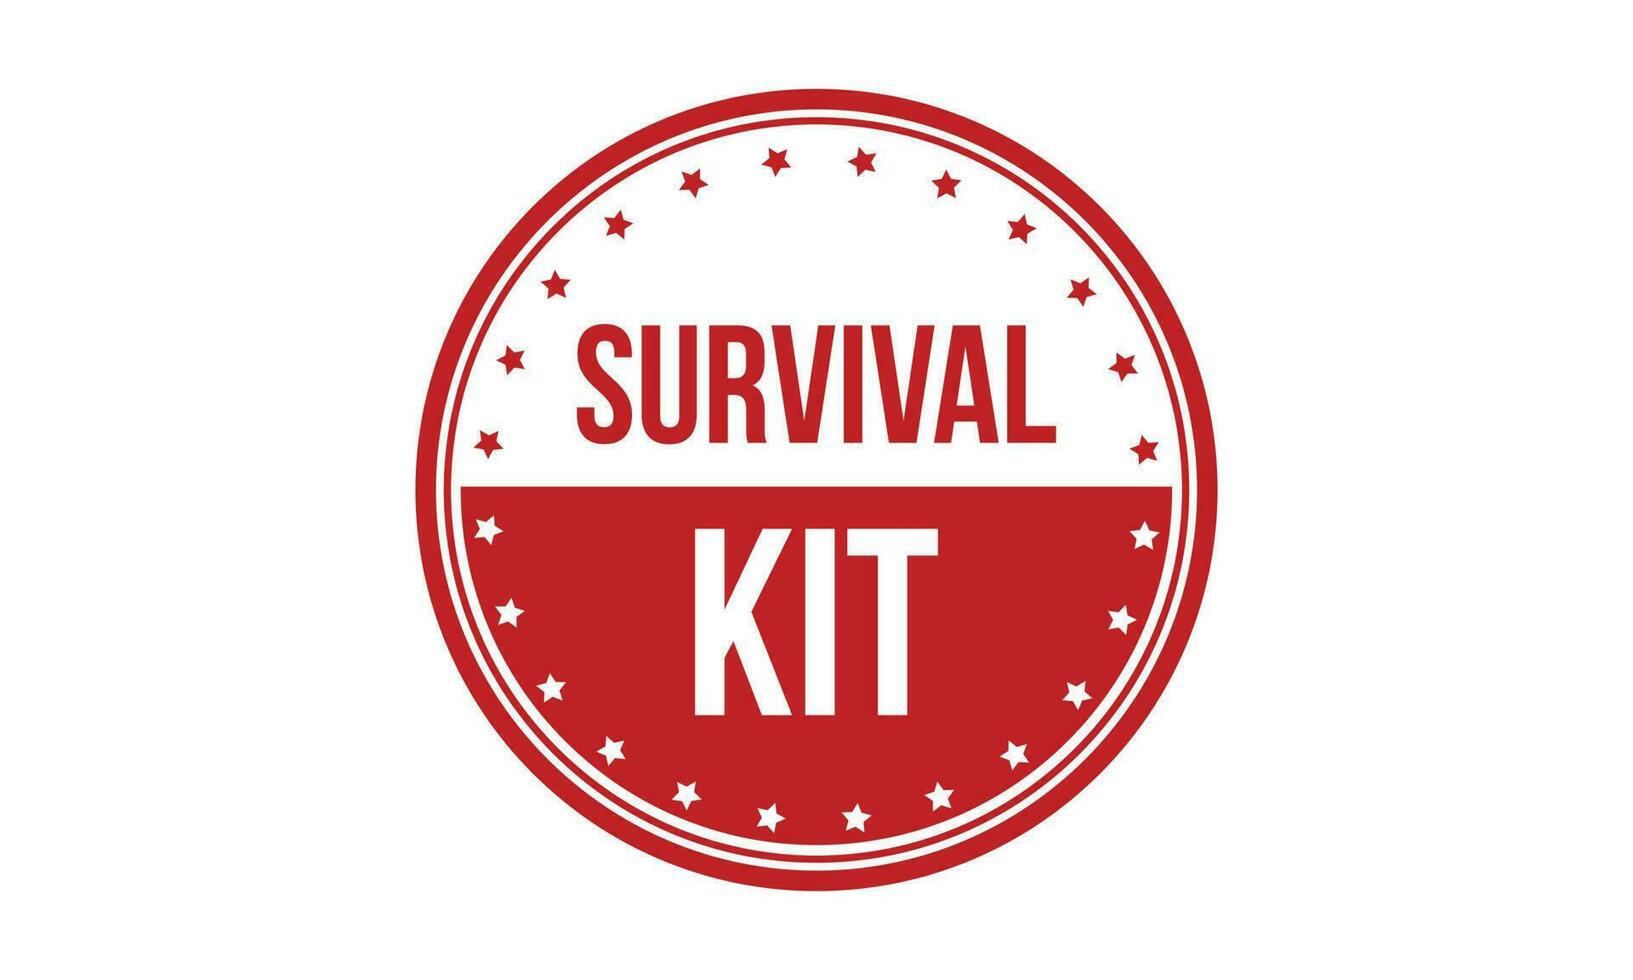 Survival Kit Rubber Stamp Seal Vector